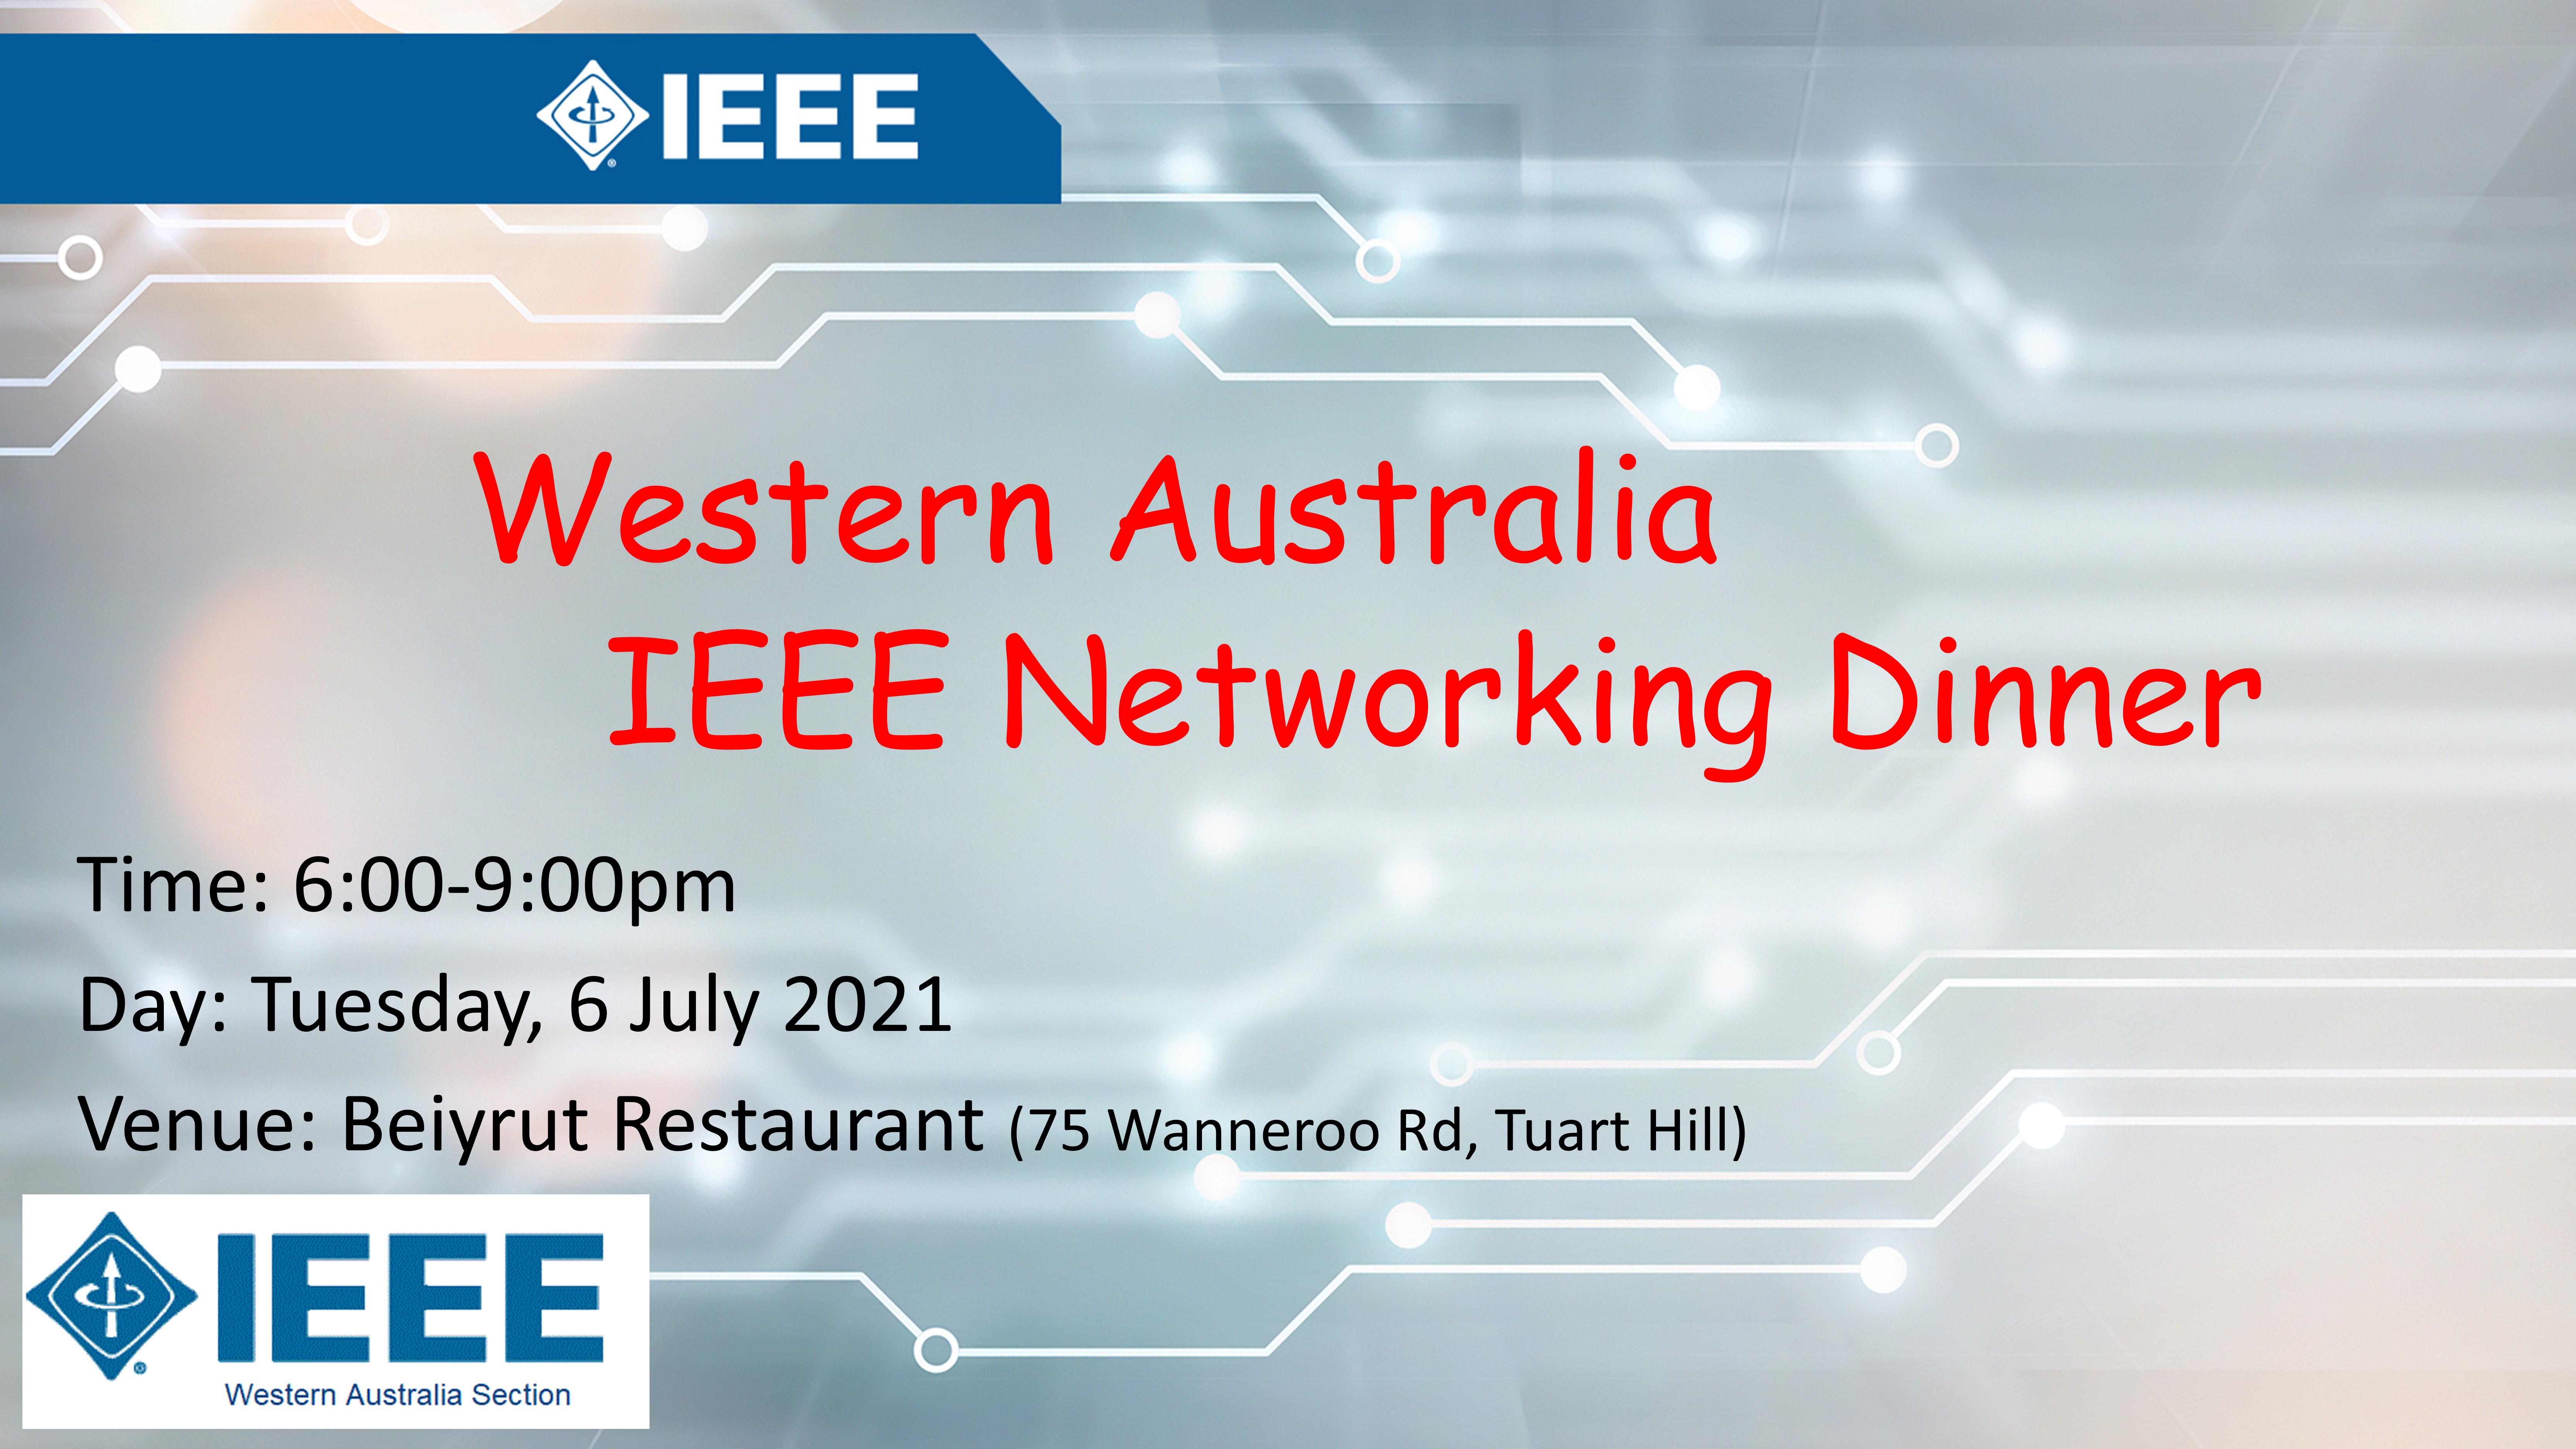 IEEE WA Section mid year networking and dinner